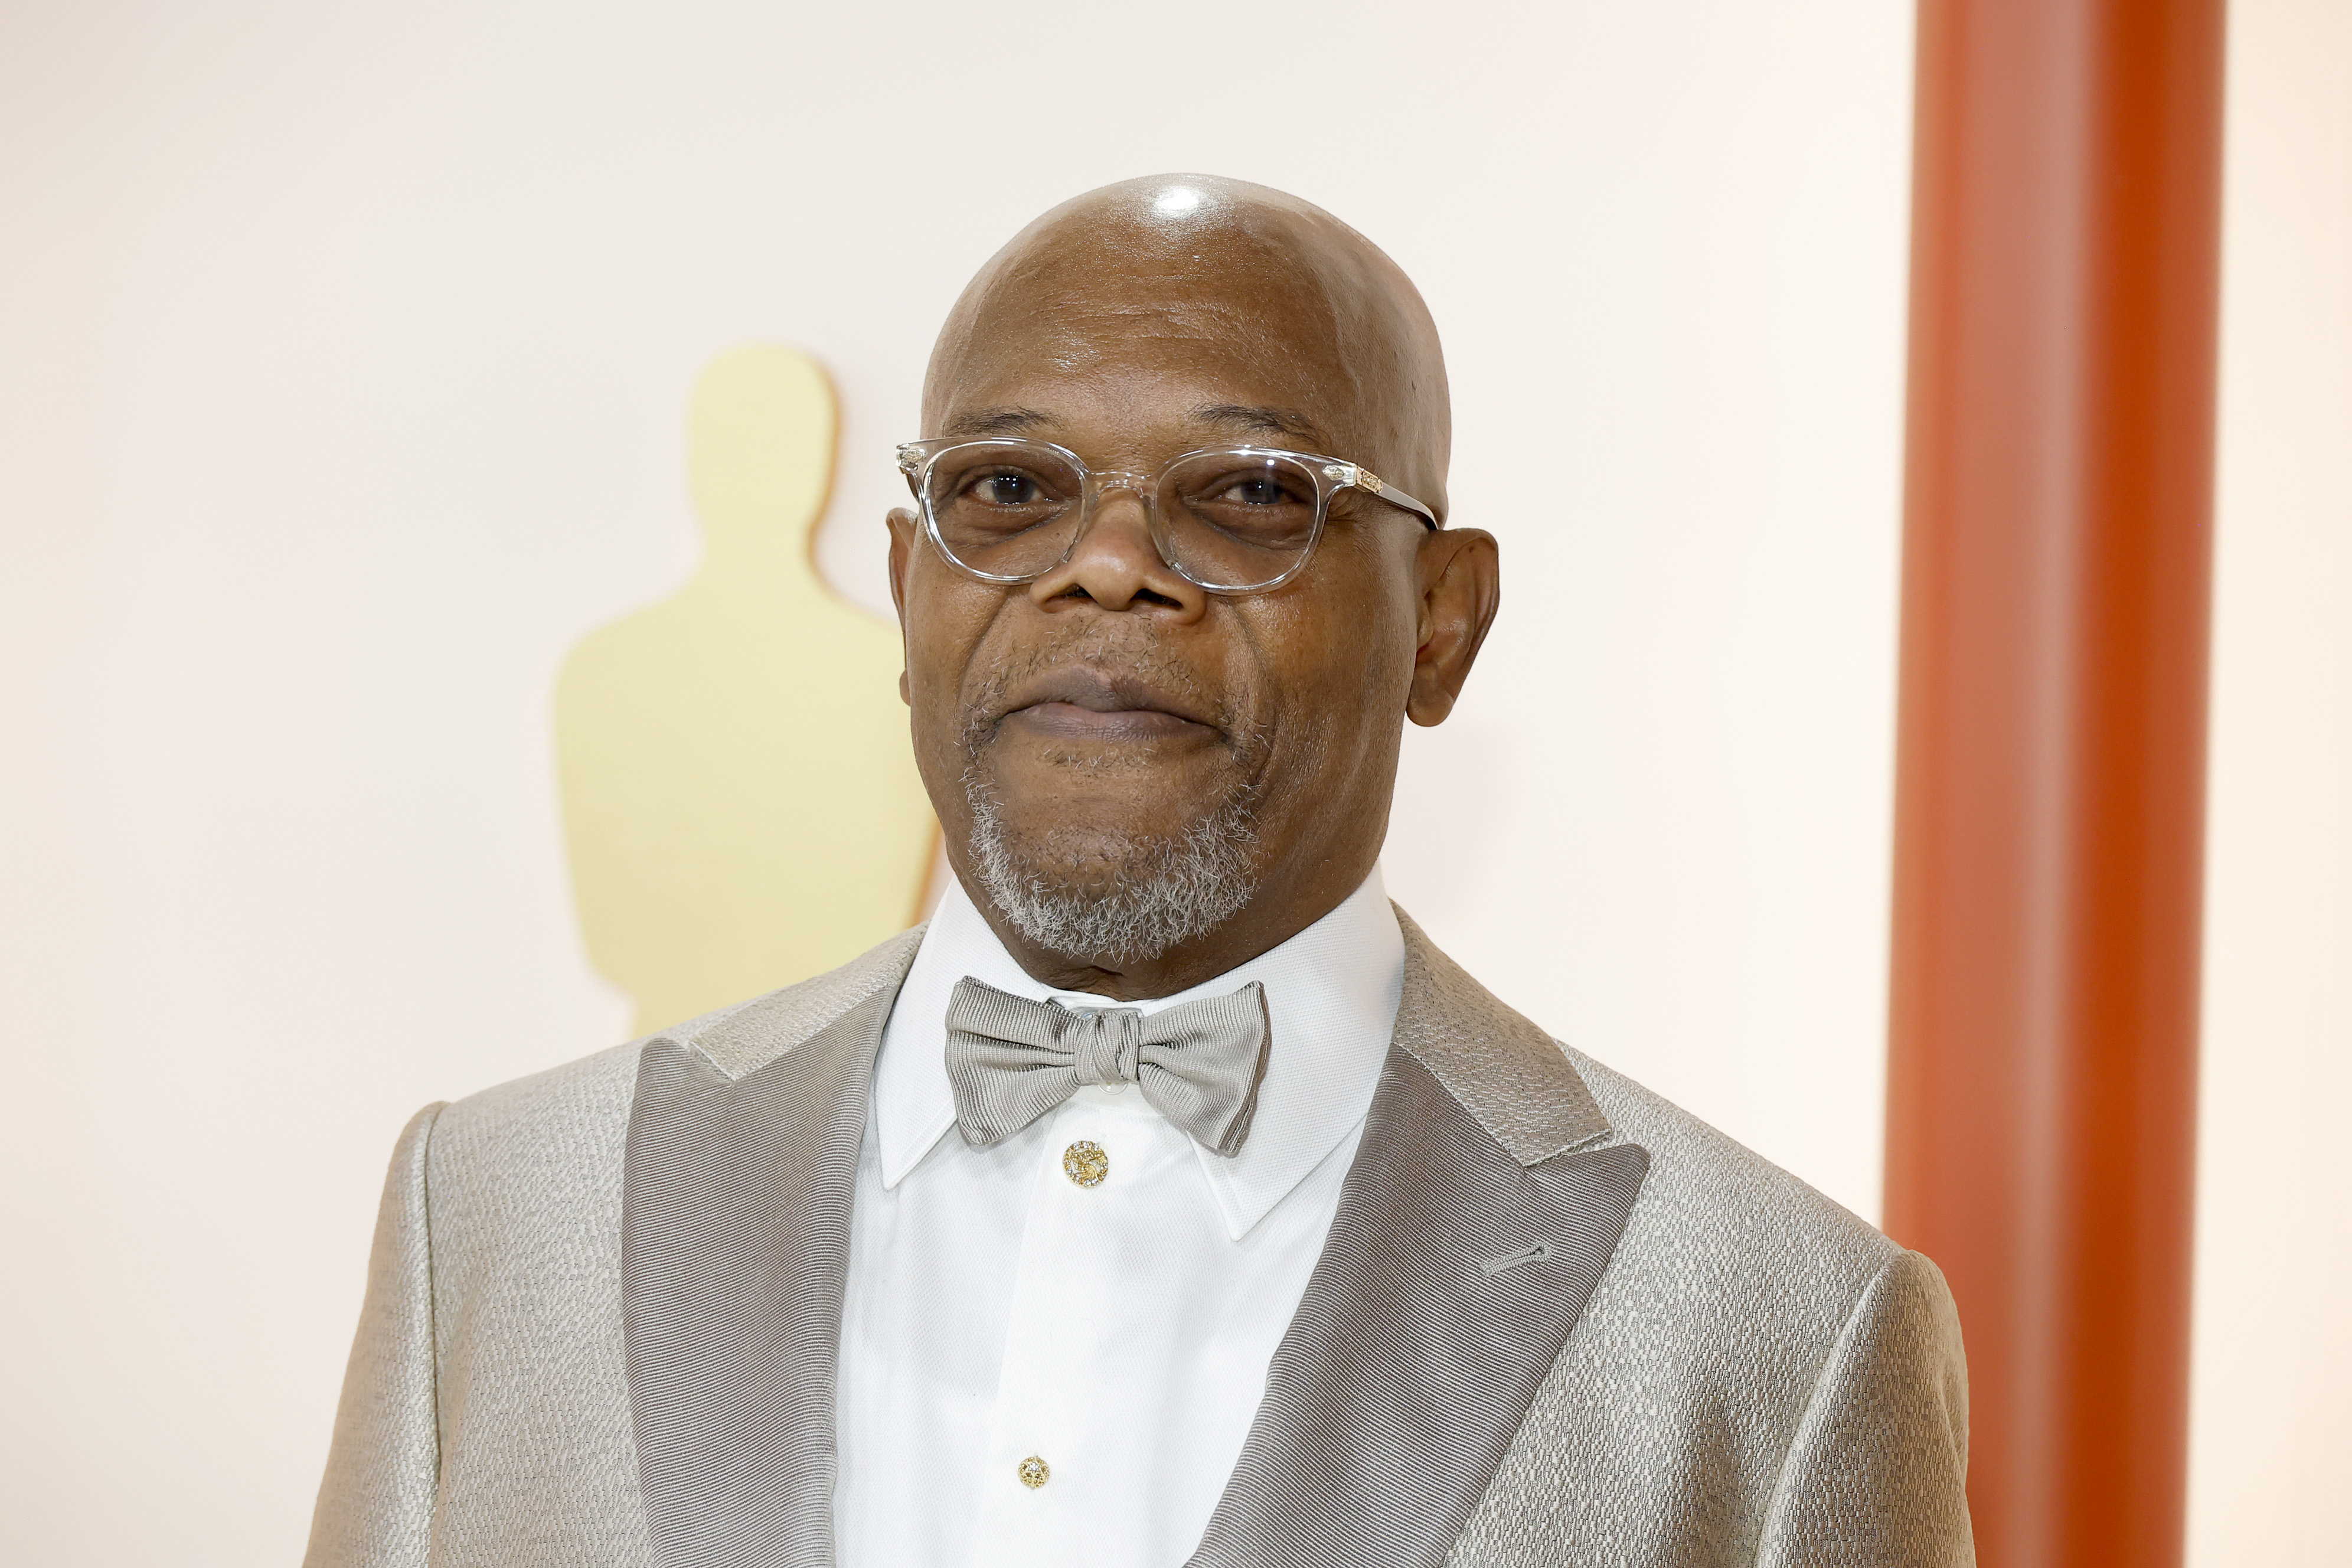 Samuel L. Jackson attends the 95th Annual Academy Awards on March 12, 2023 in Hollywood, California | Source: Getty Images